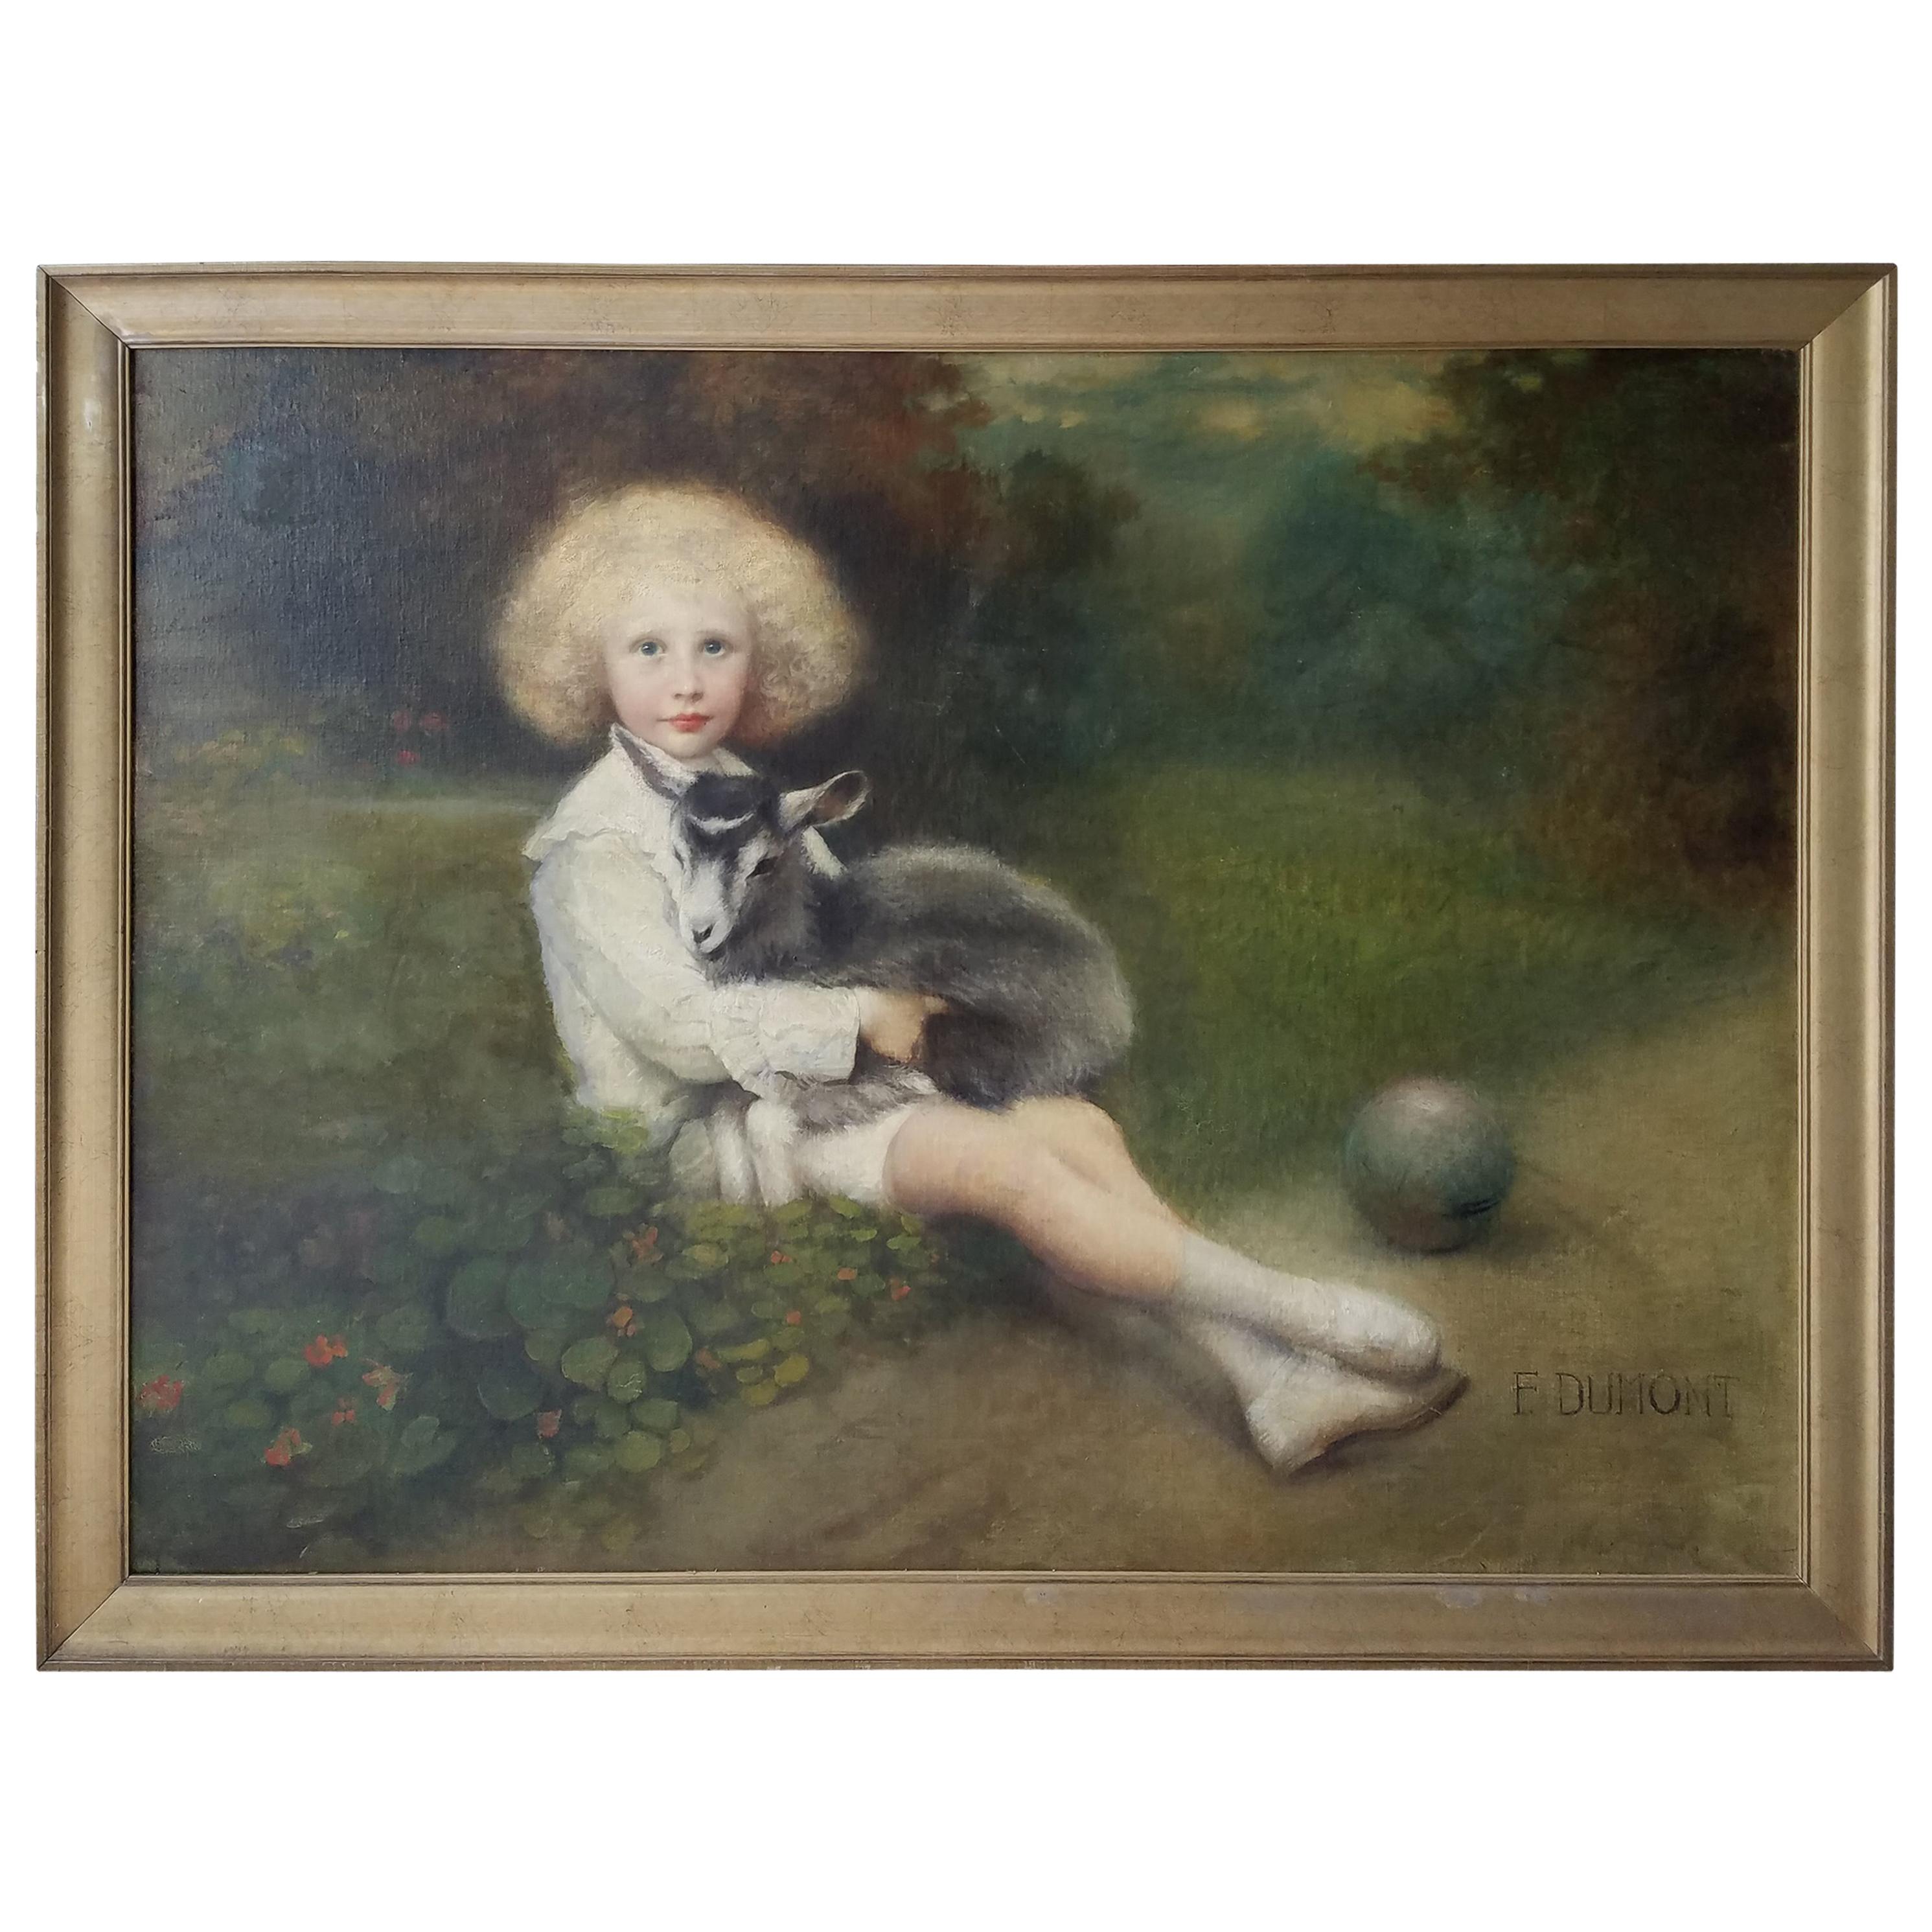 19th Century French Painting of an Aristocratic Young Boy with His Pet Goat